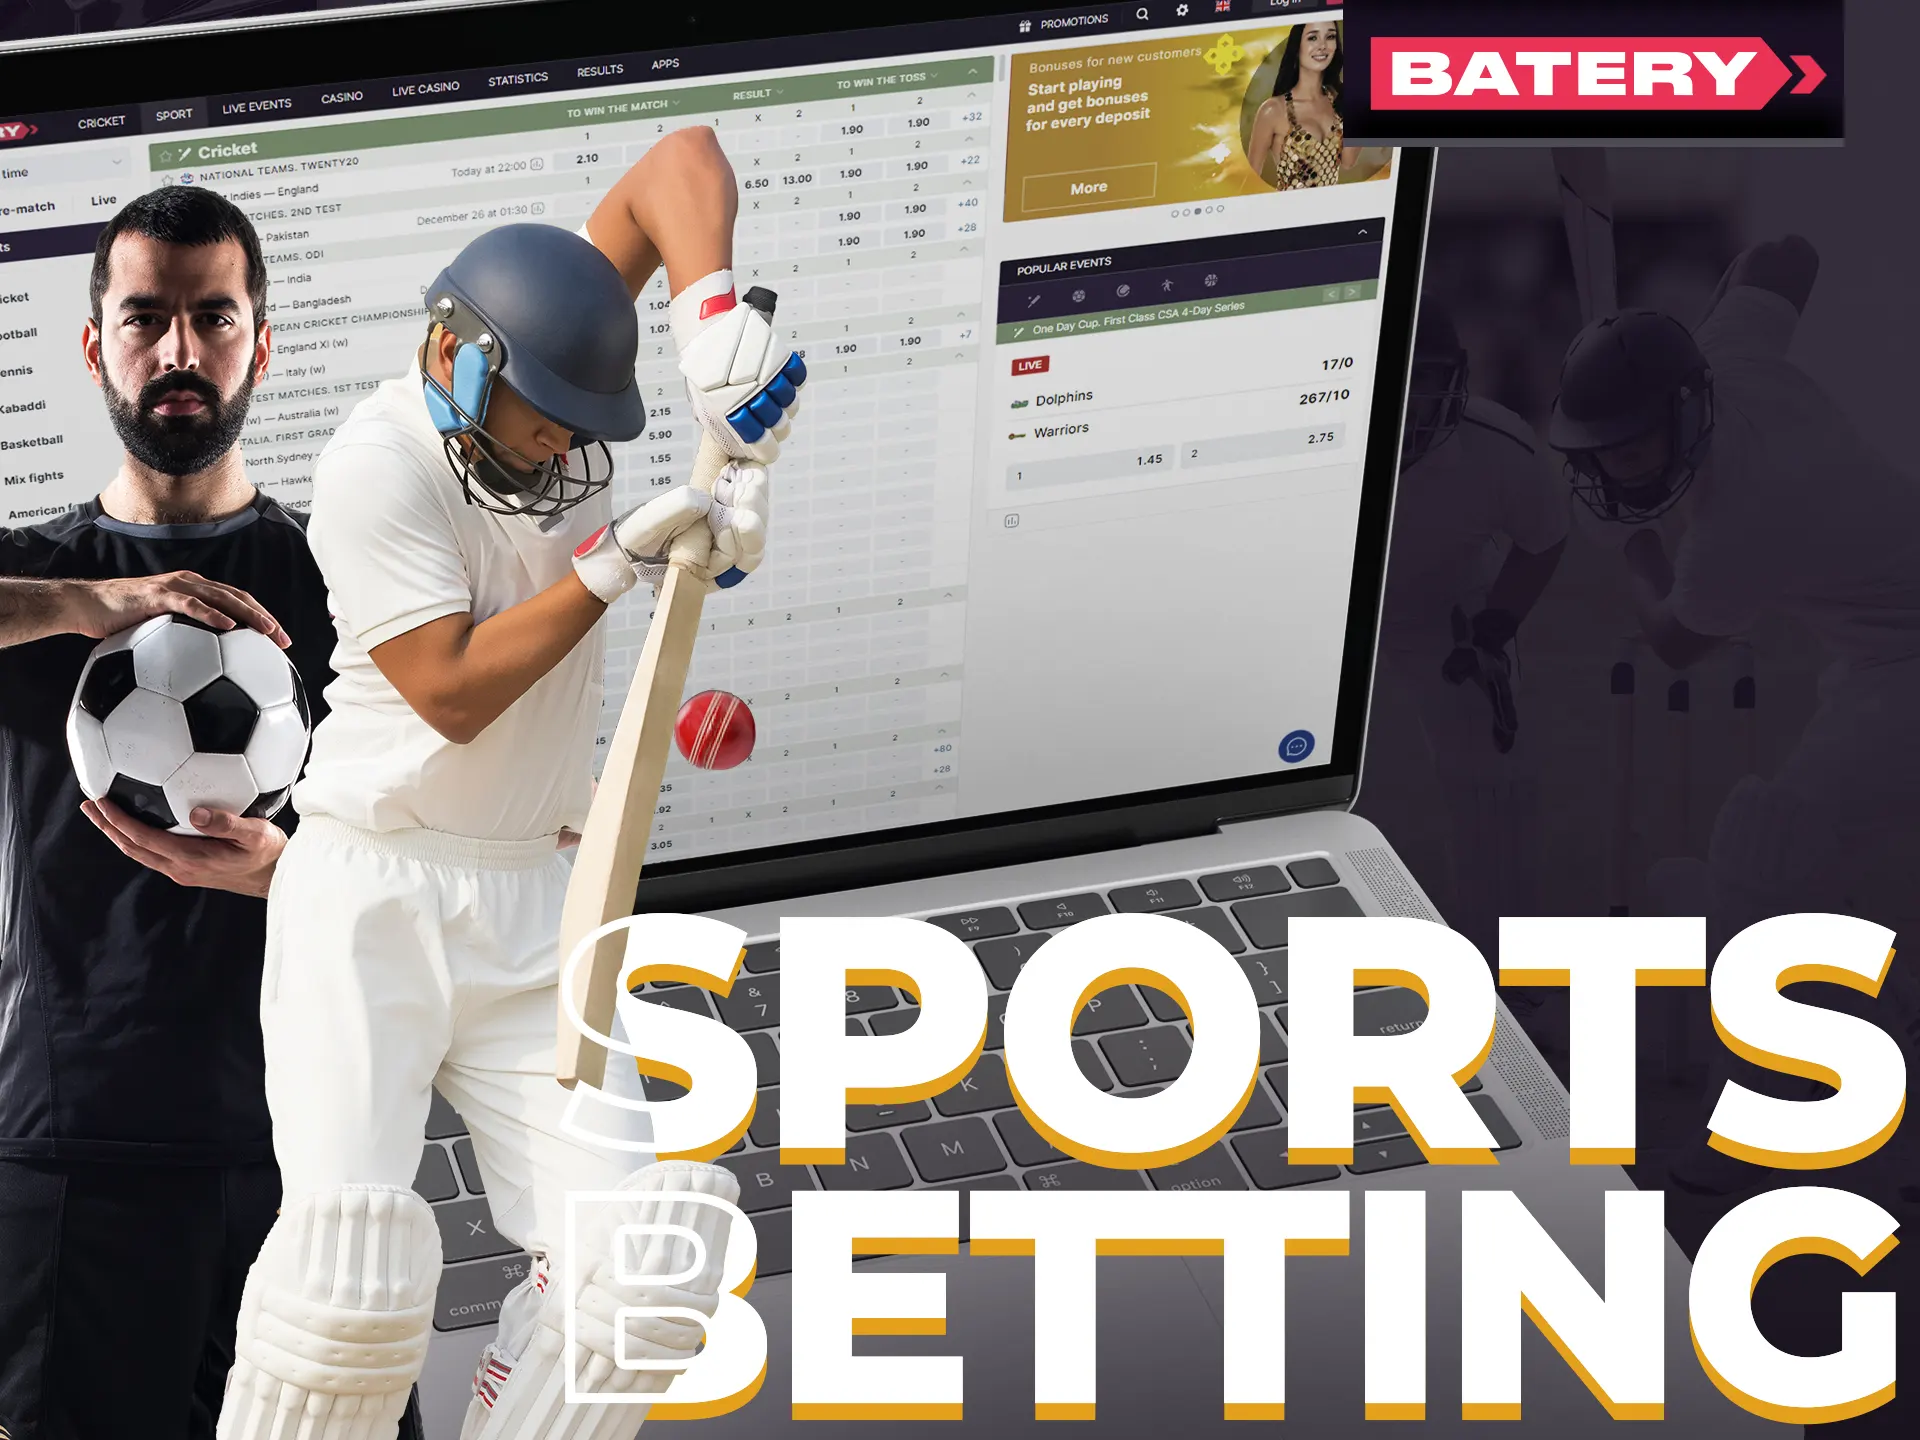 Batery offers sports betting on Soccer, Cricket, Rugby, Table Tennis, and Kabaddi events.